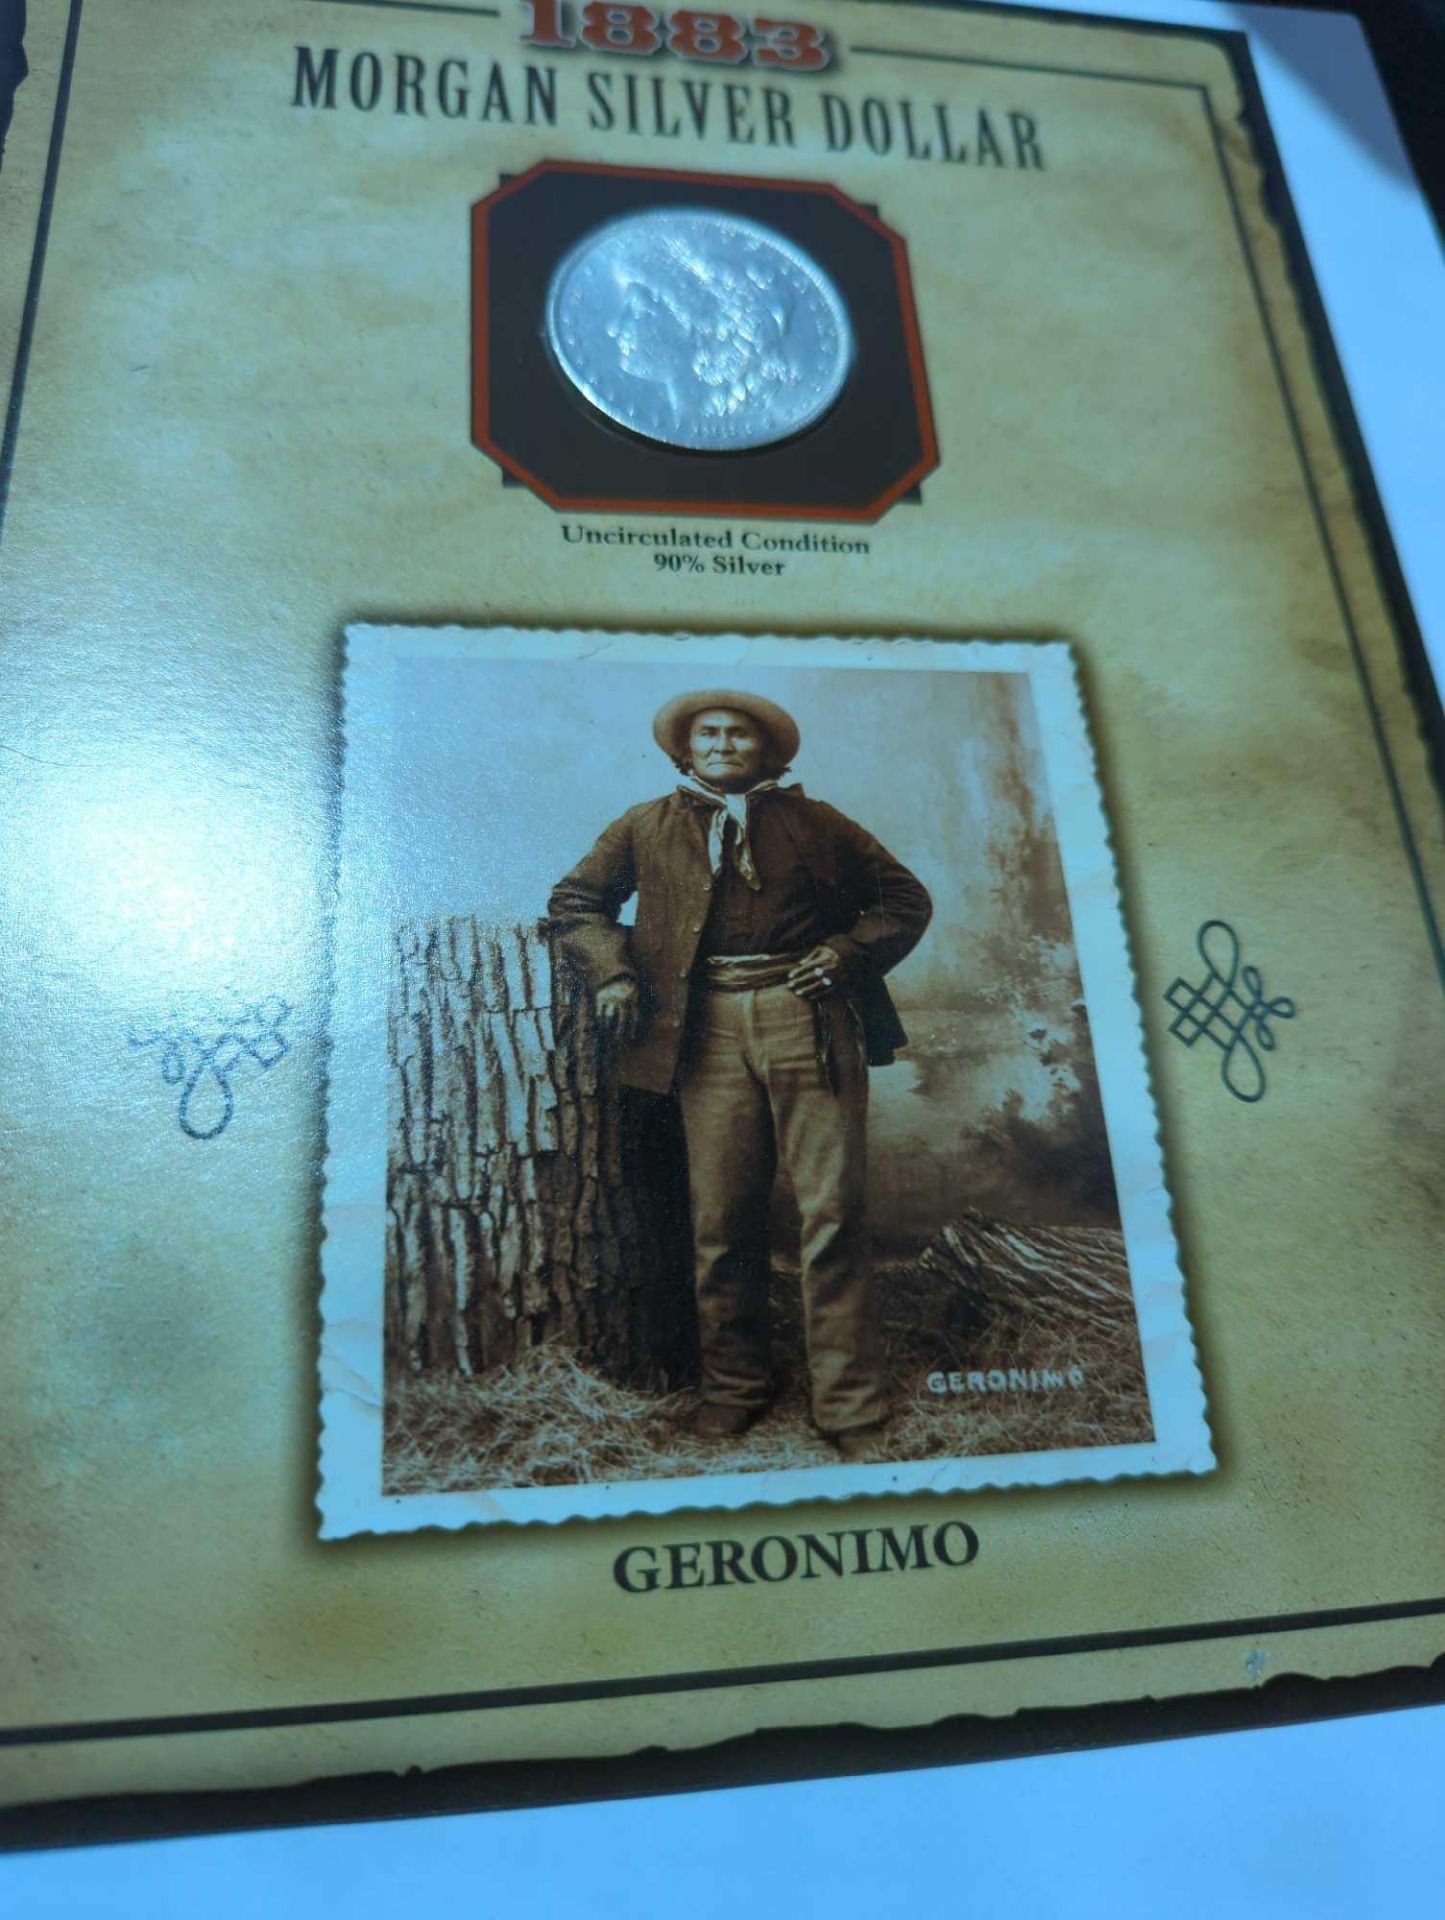 1883 Uncirculated Condition Morgan Dollar with Commemorative Geronimo stamp and facts - Image 3 of 7